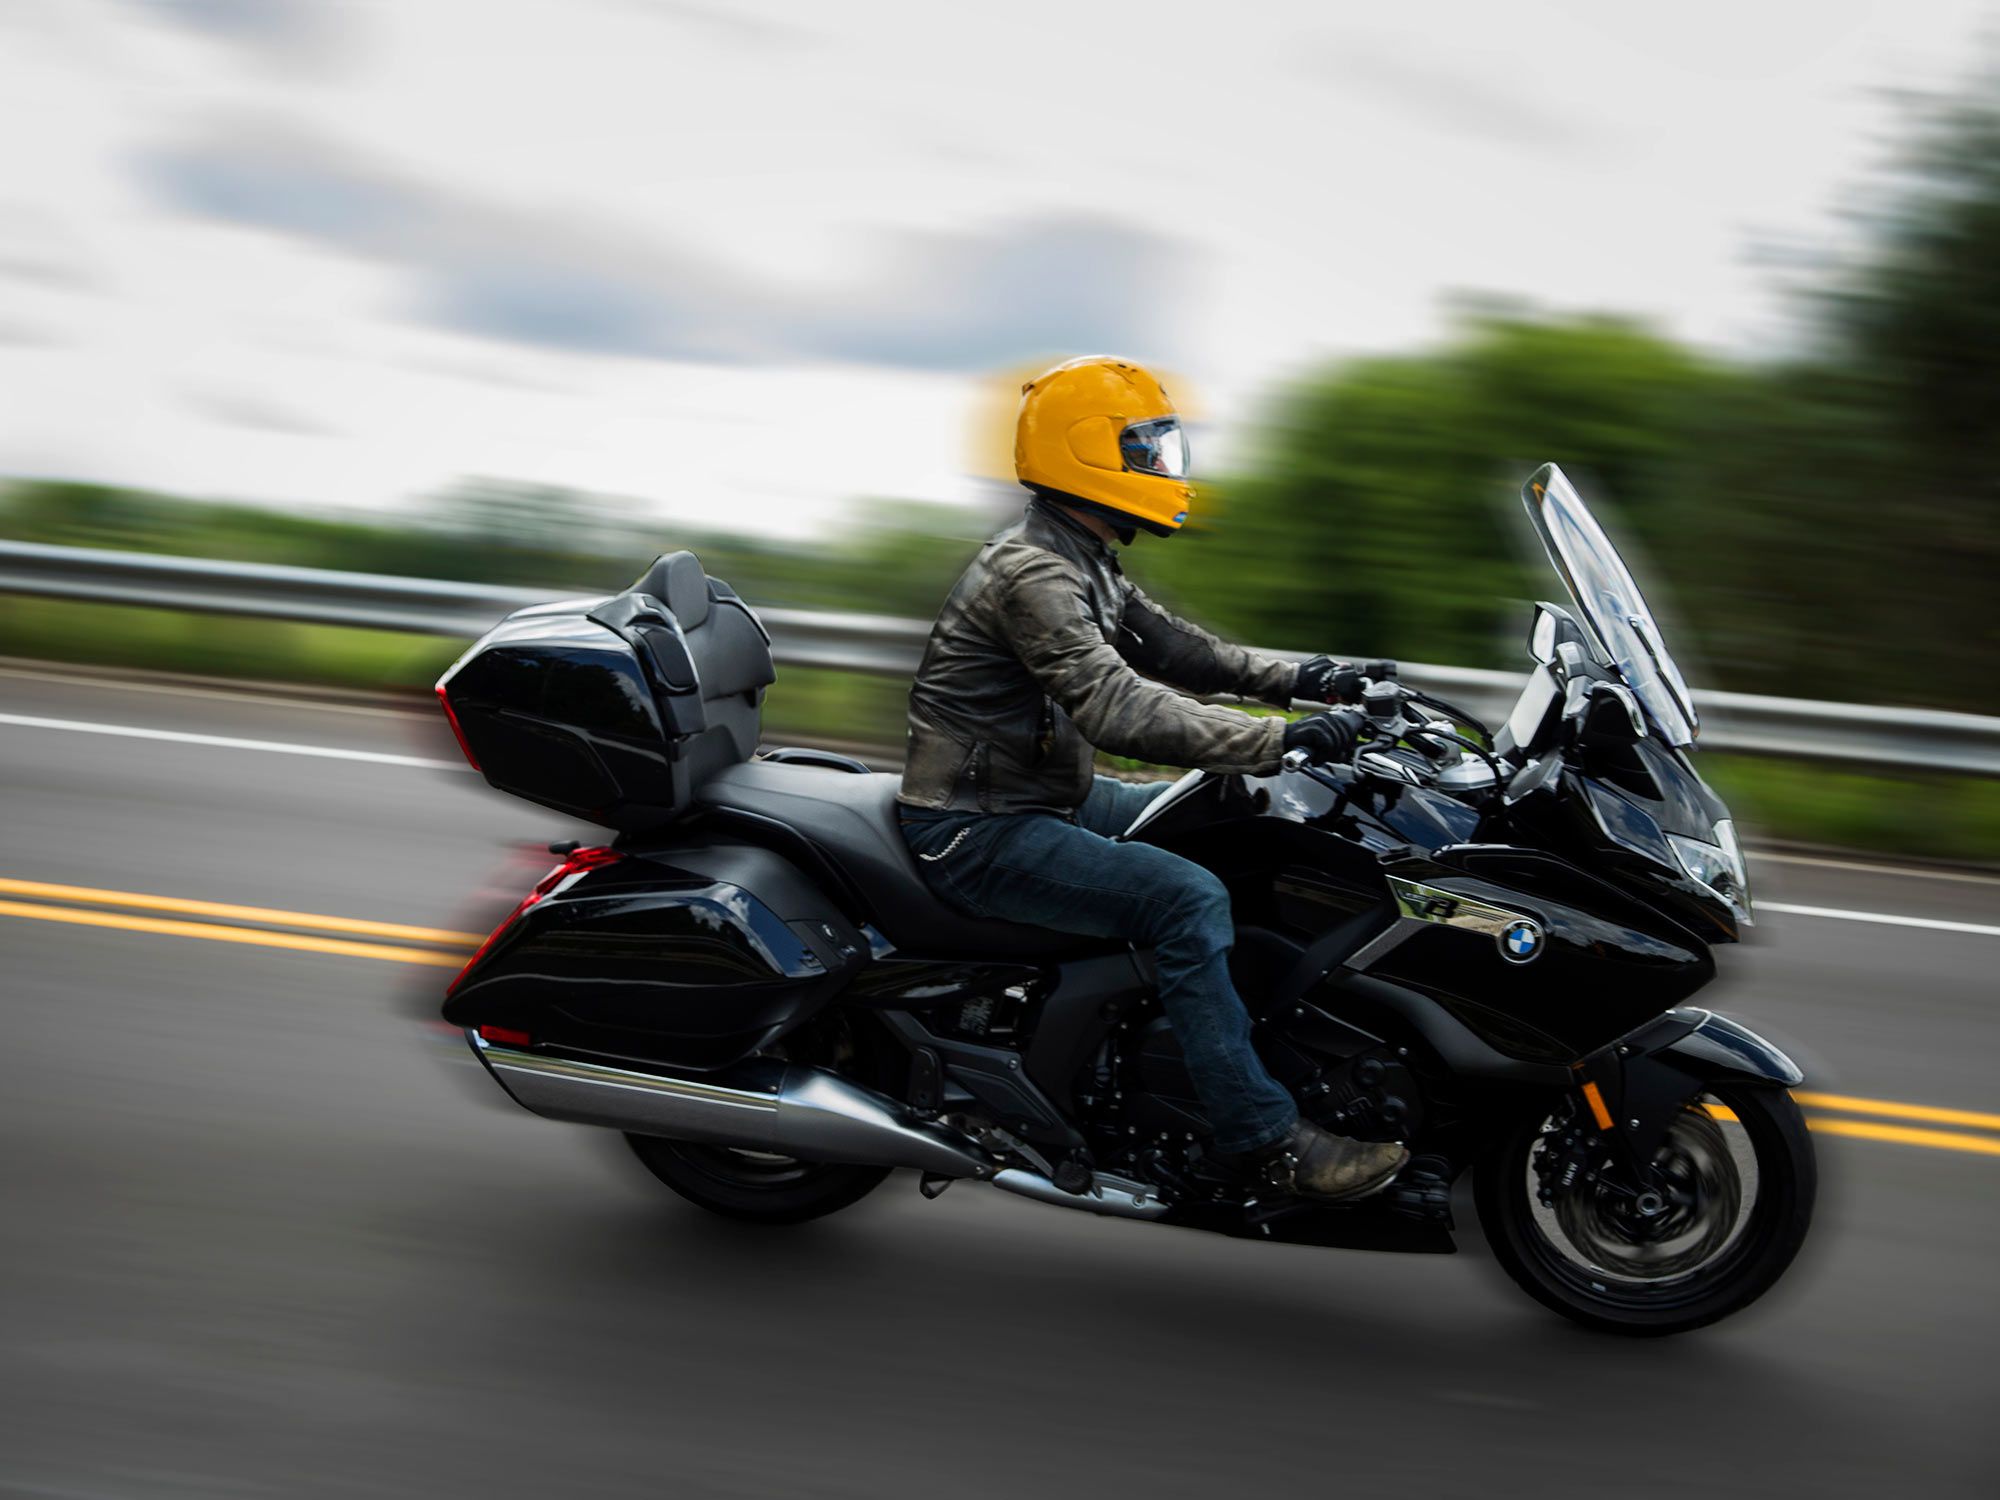 Feeling the speed: Working the roads of SE Wisconsin aboard the BMW K 1600 Grand America.